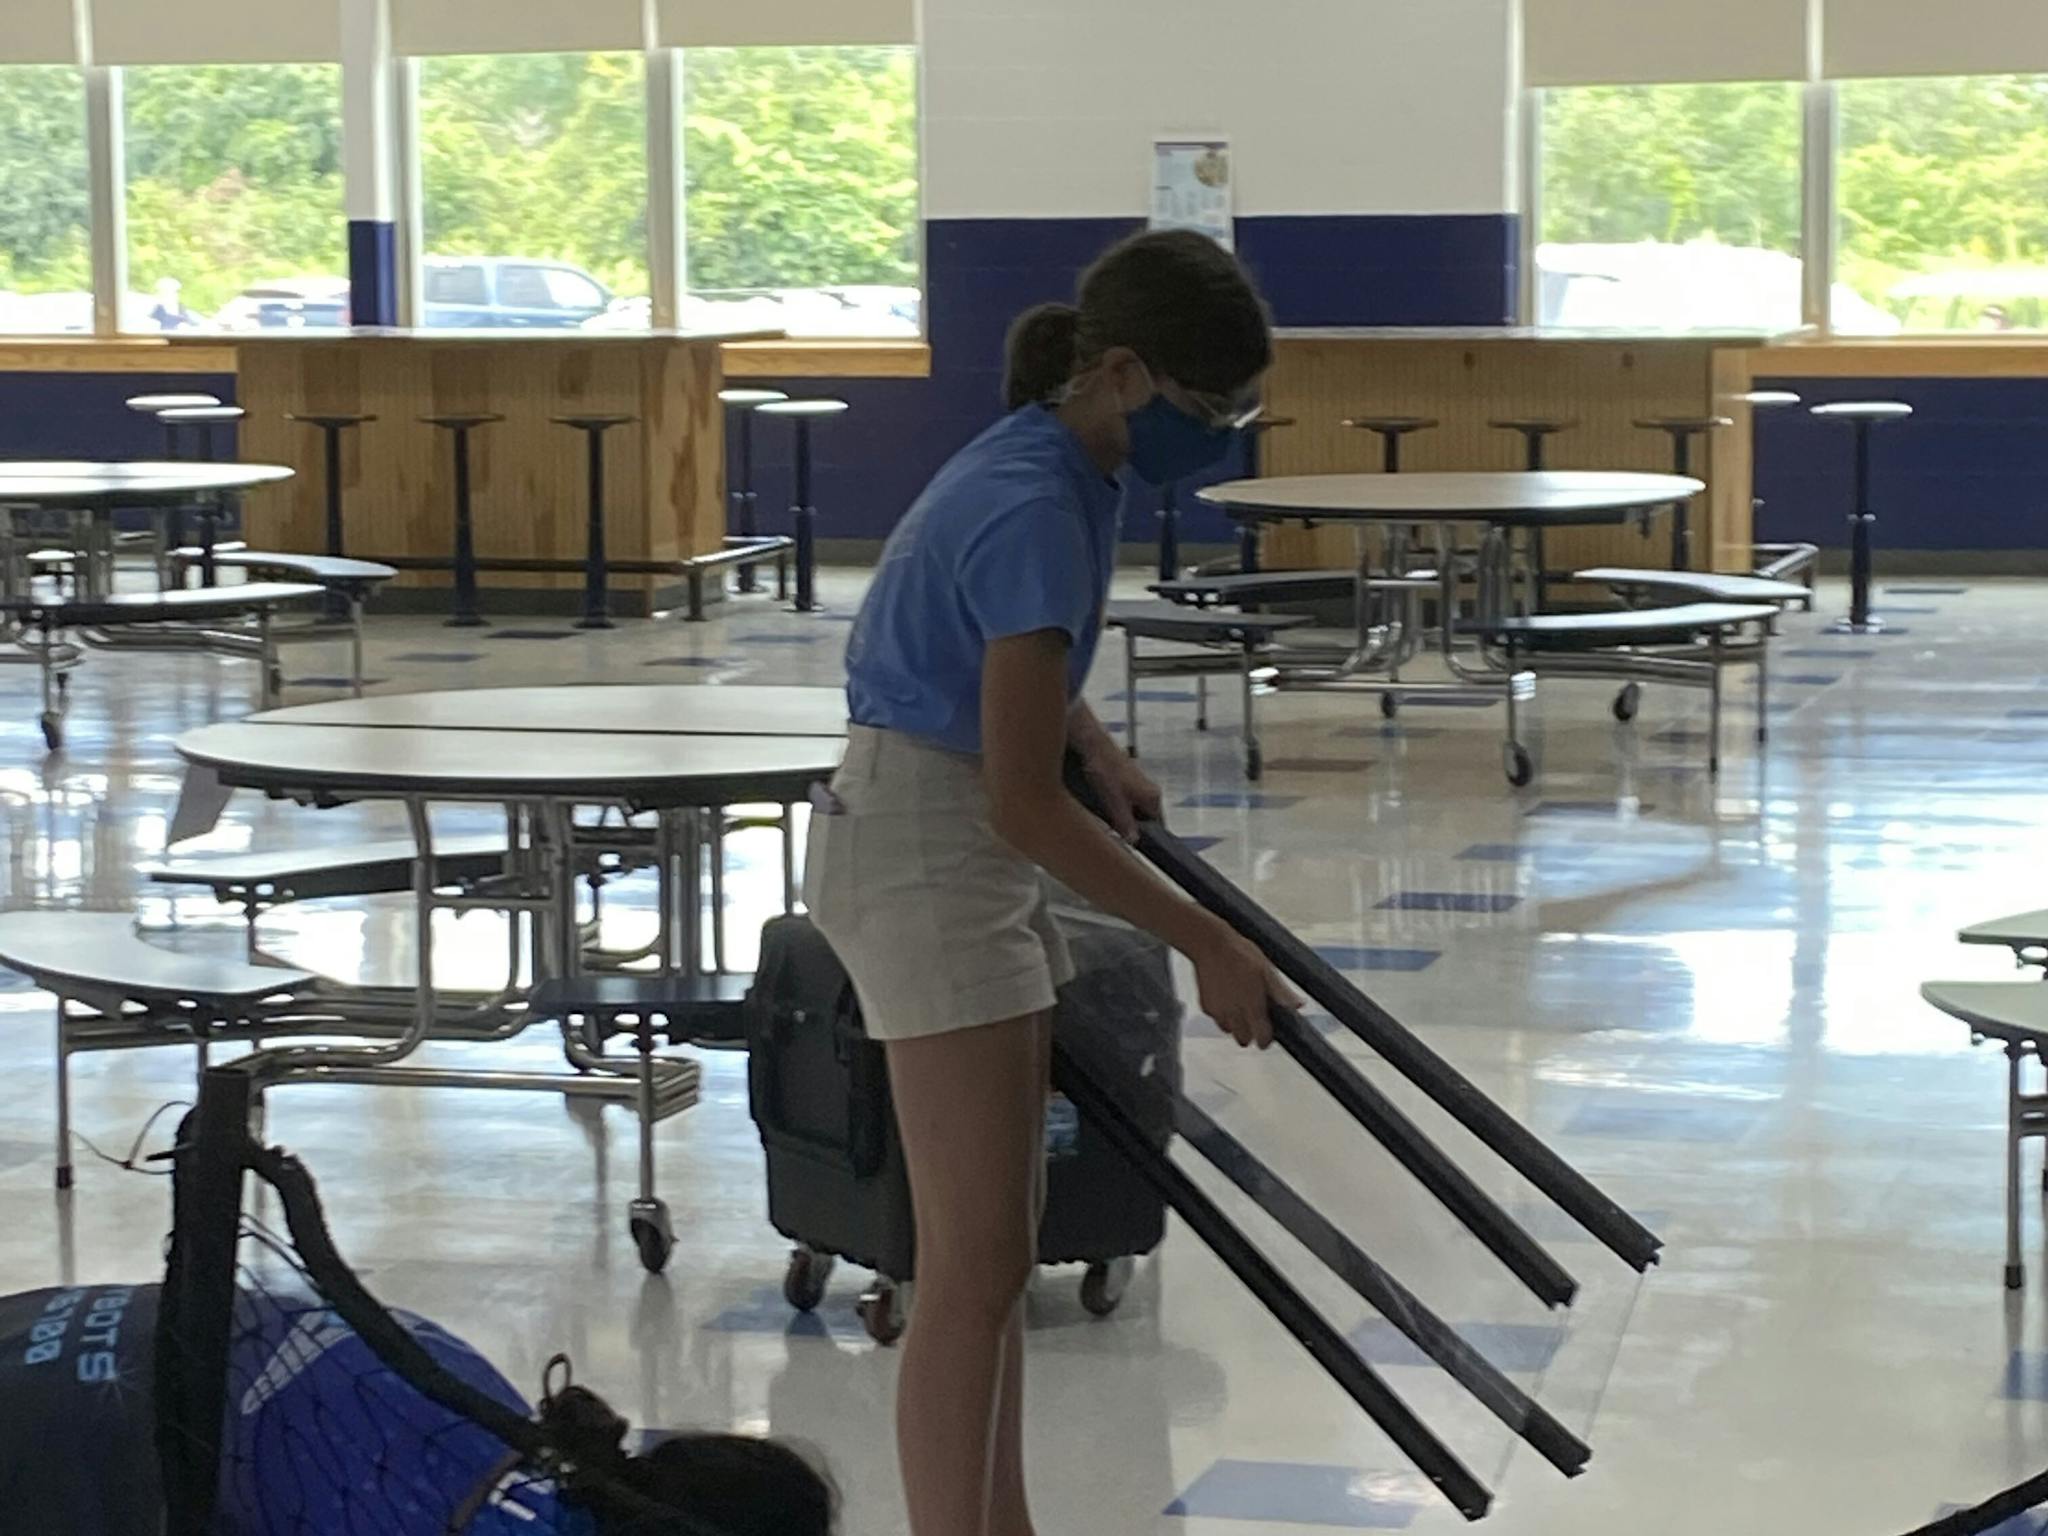 Cleaning up after the Freshman Orientation.